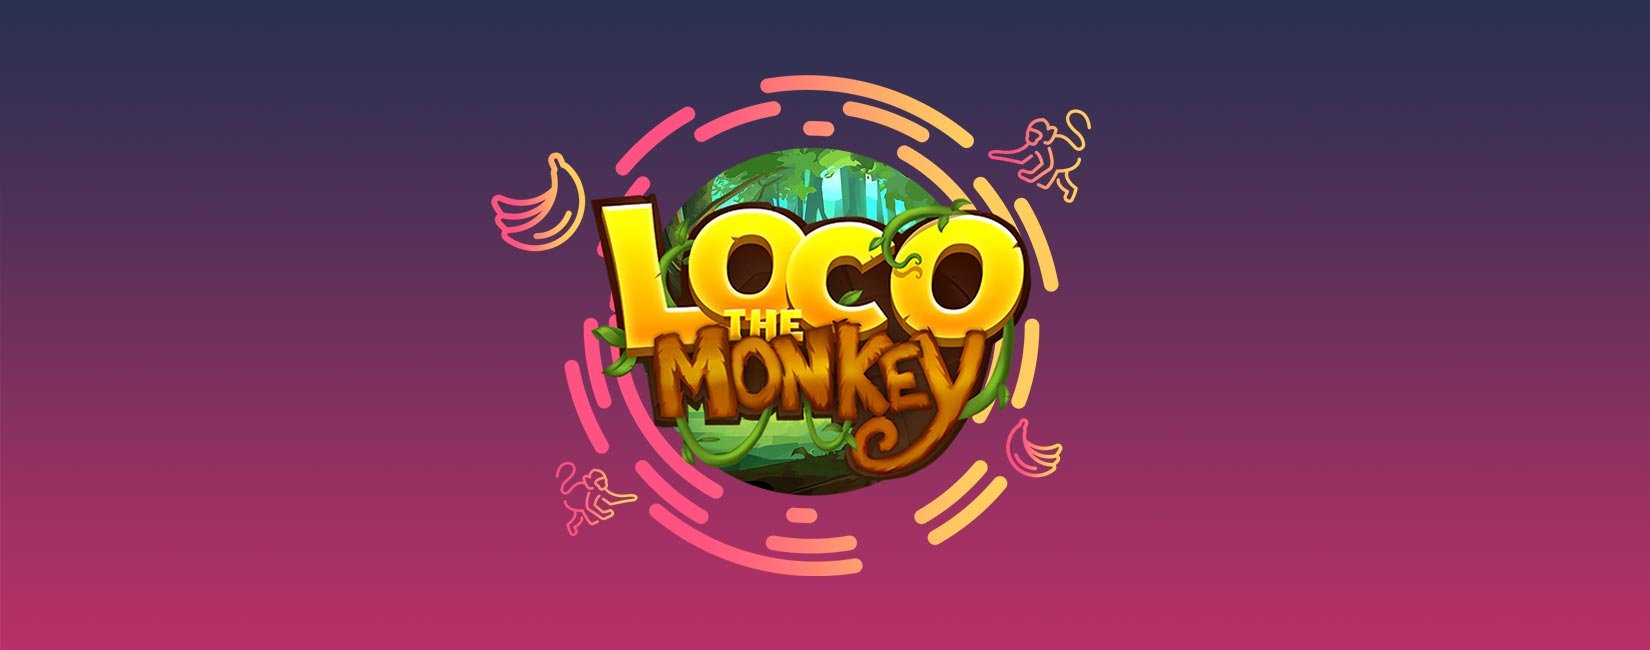 CRE-289019-GS-February Reviews Digital Design Loco the Monkey-page banner-1650x650